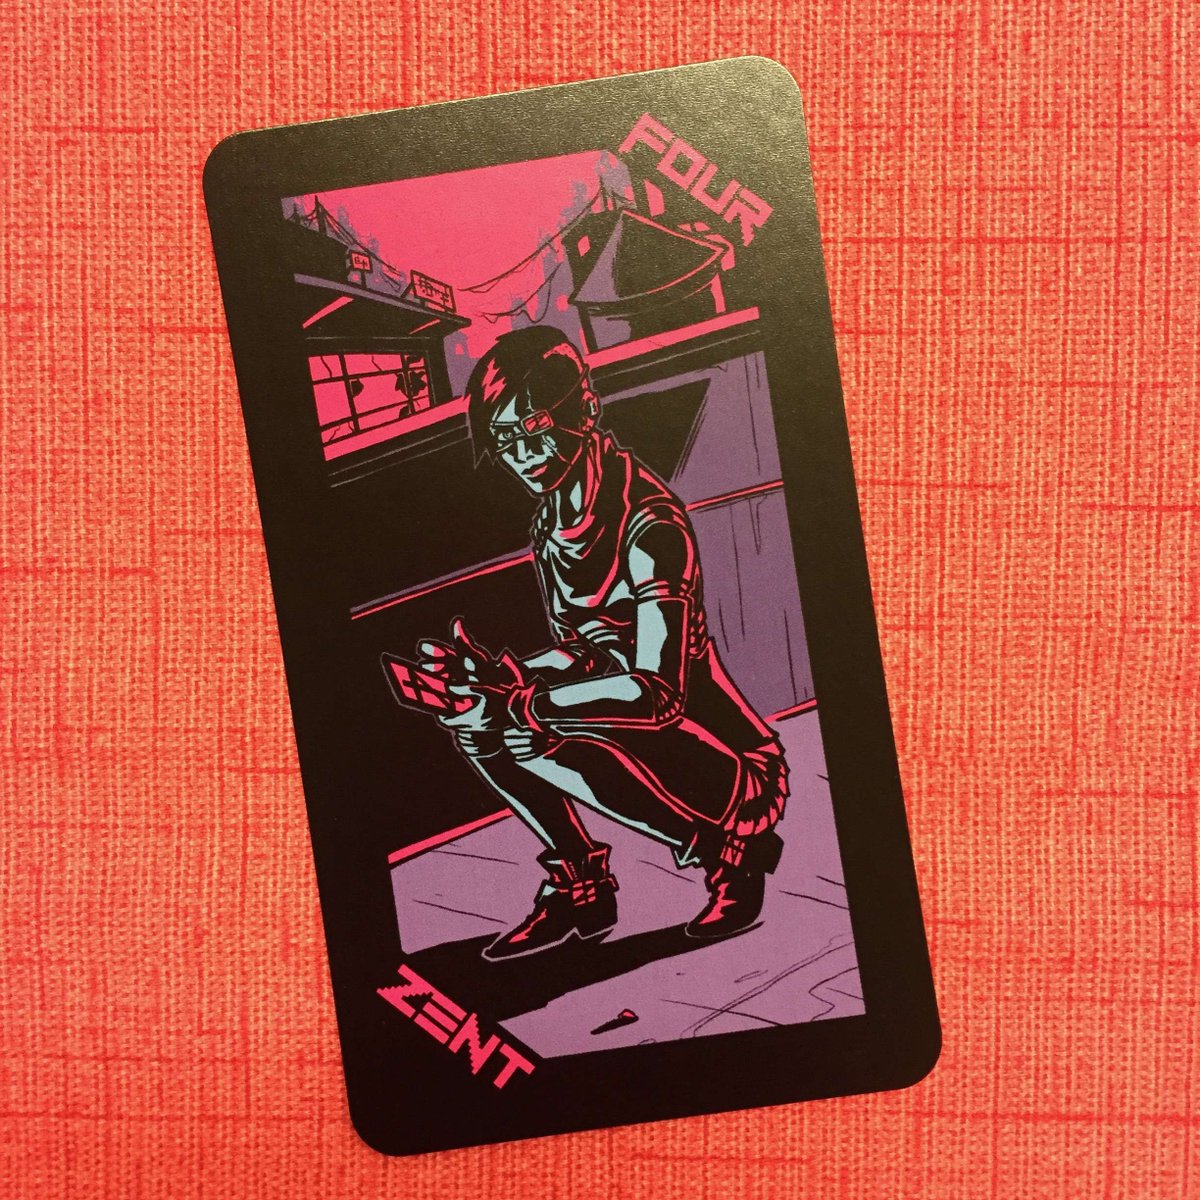 [9 Jul] 4 of Zent from the Neon Moon Tarot #4OfZent #TheNeonMoonTarot
Time to step up, and figure out if what you’ve been holding on to is actually worth it or not. Will you take that risk? #StepUp #HoldingOn #Risk #ValidateYourIdea More at amp.gs/7ZkS